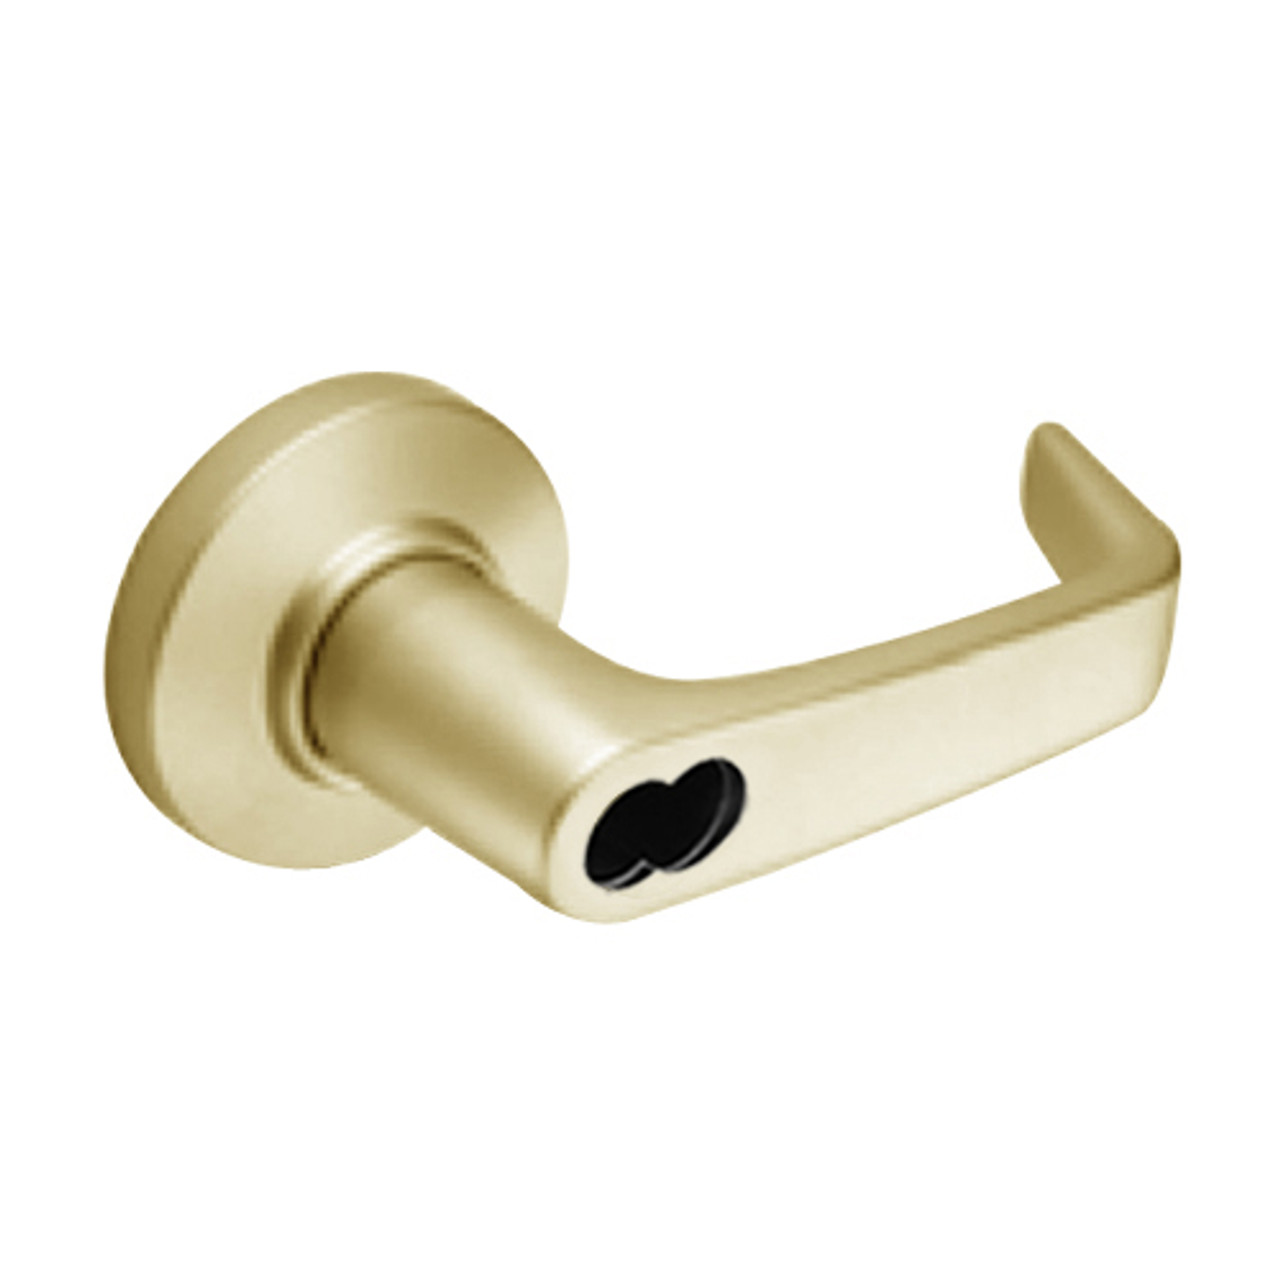 9K37A15CSTK606 Best 9K Series Dormitory or Storeroom Cylindrical Lever Locks with Contour Angle with Return Lever Design Accept 7 Pin Best Core in Satin Brass